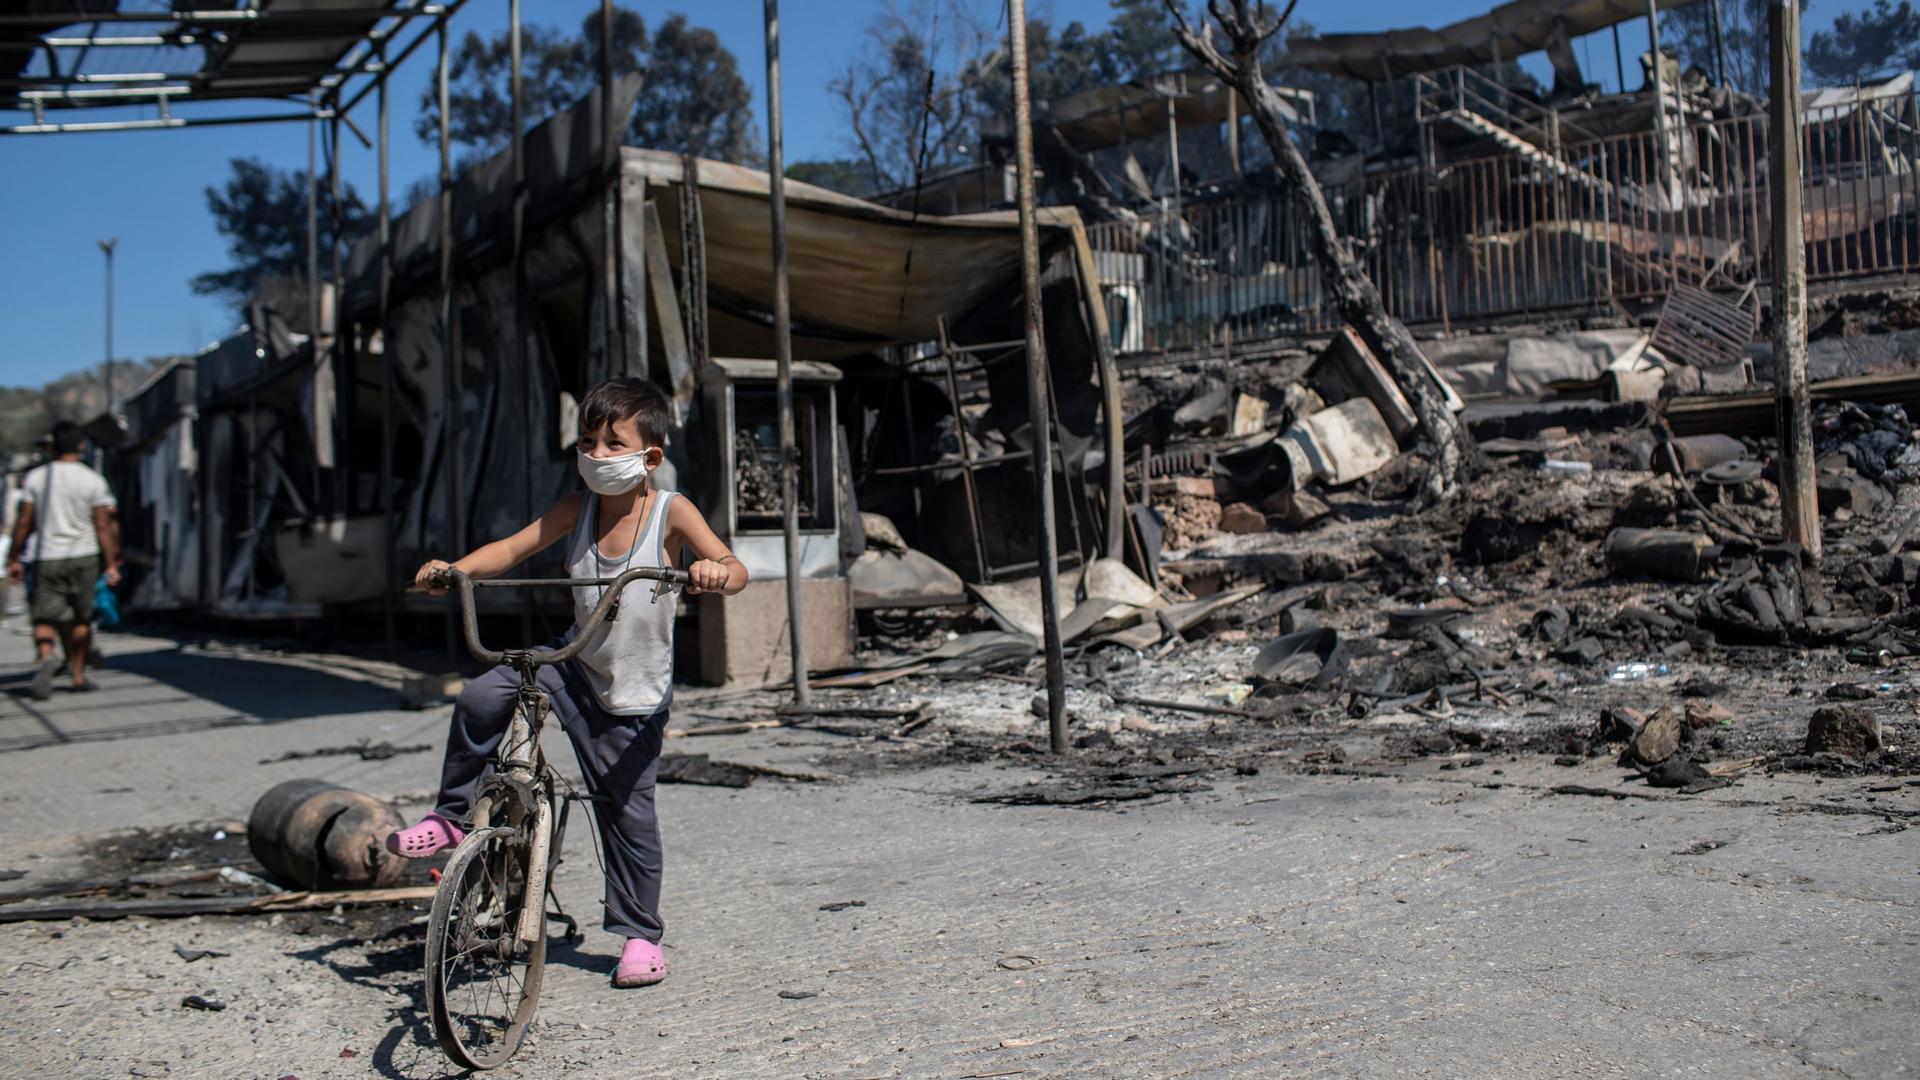 A young boy is shown sitting on a bike without tires in front of a destroyed structure at a refugee camp.